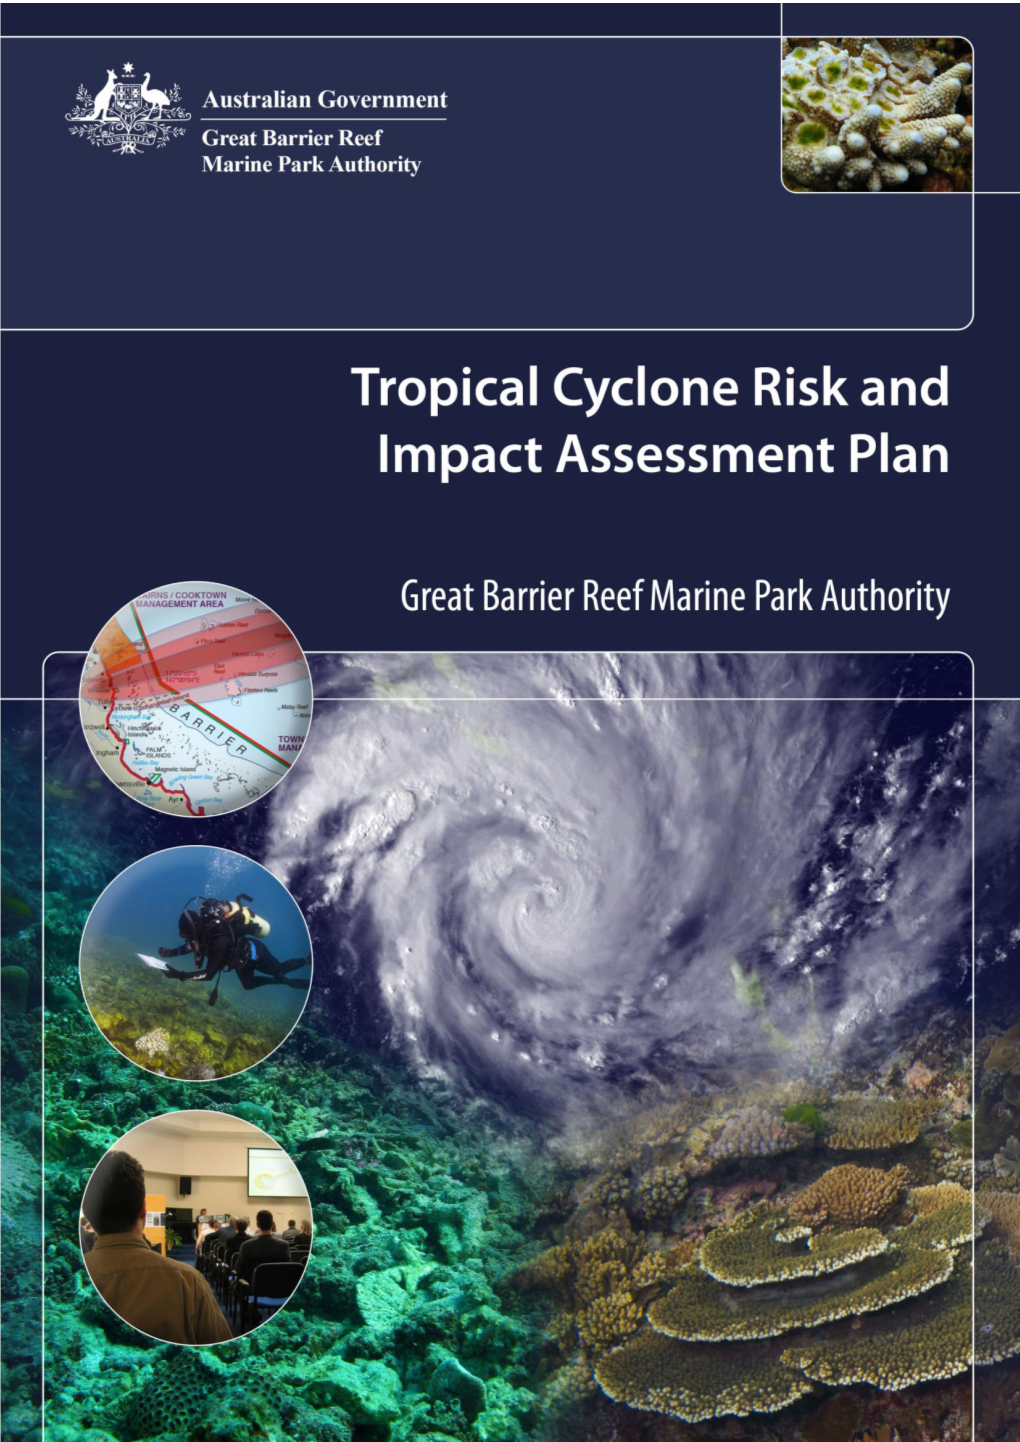 Tropical Cyclone Risk and Impact Assessment Plan Final Feb2014.Pdf